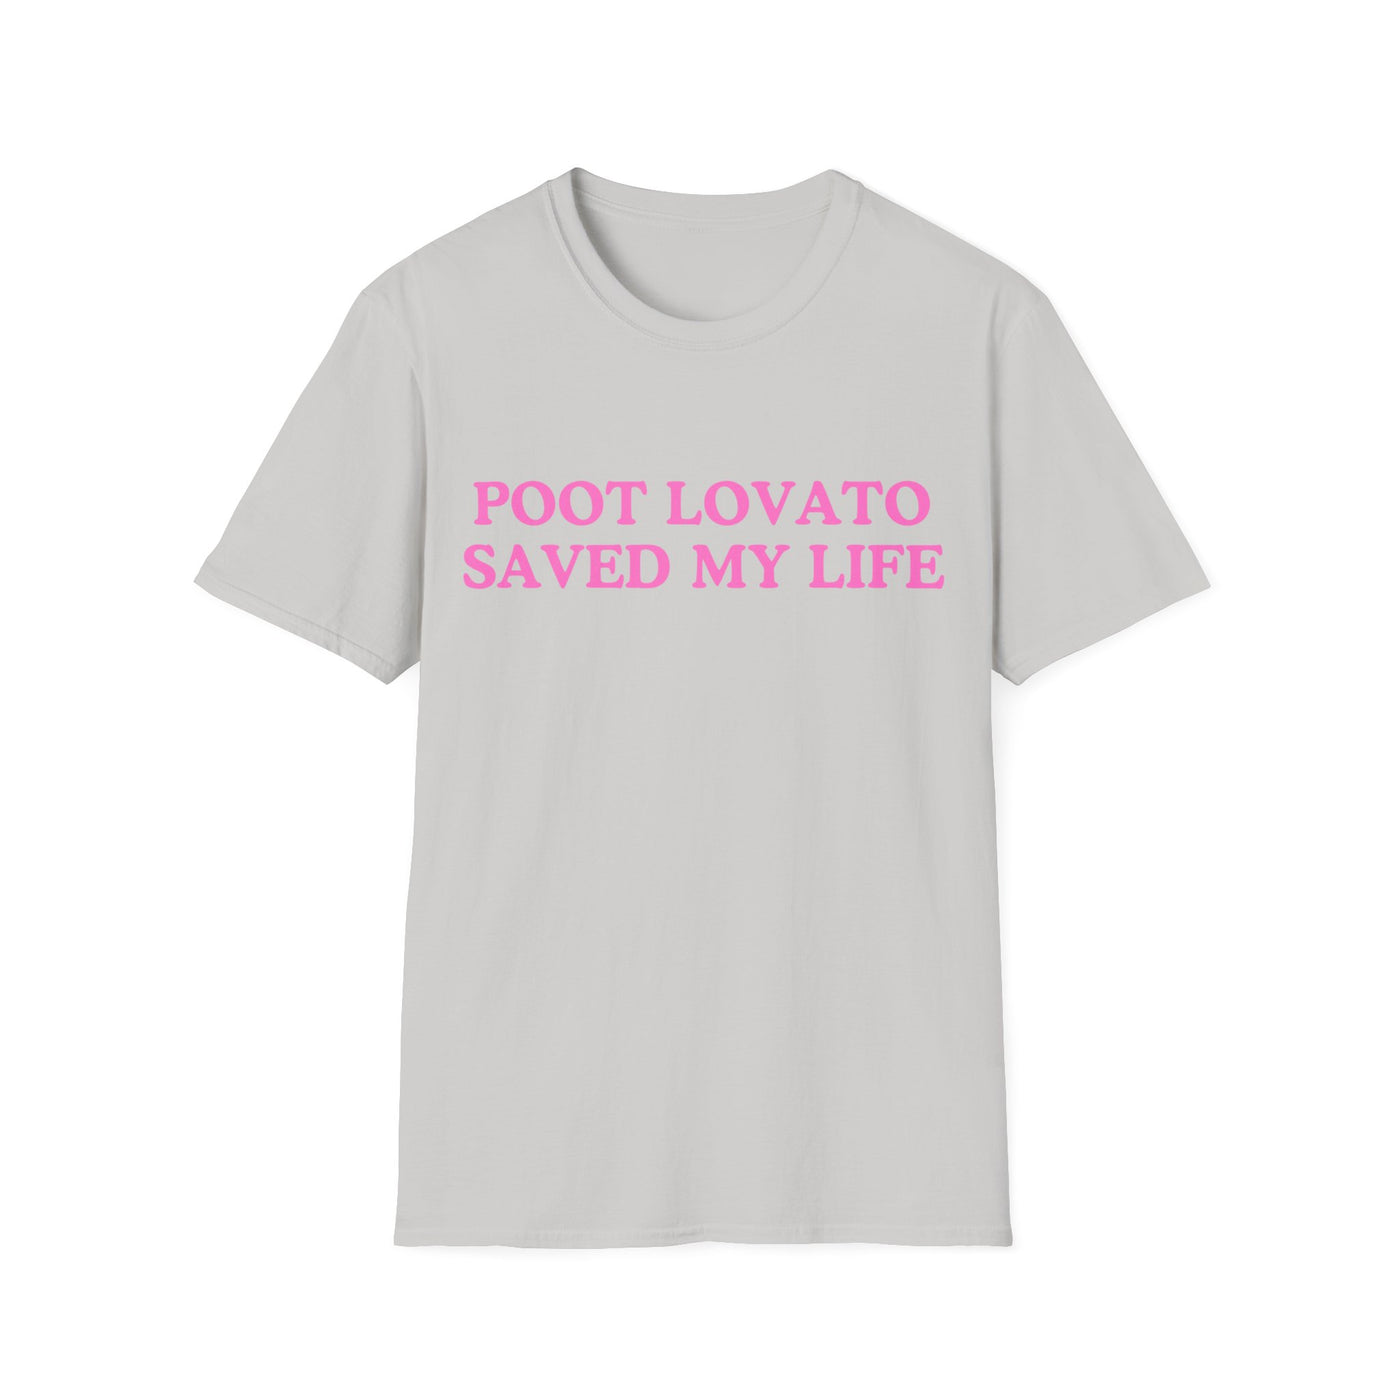 Poot Lovato Saved My Life